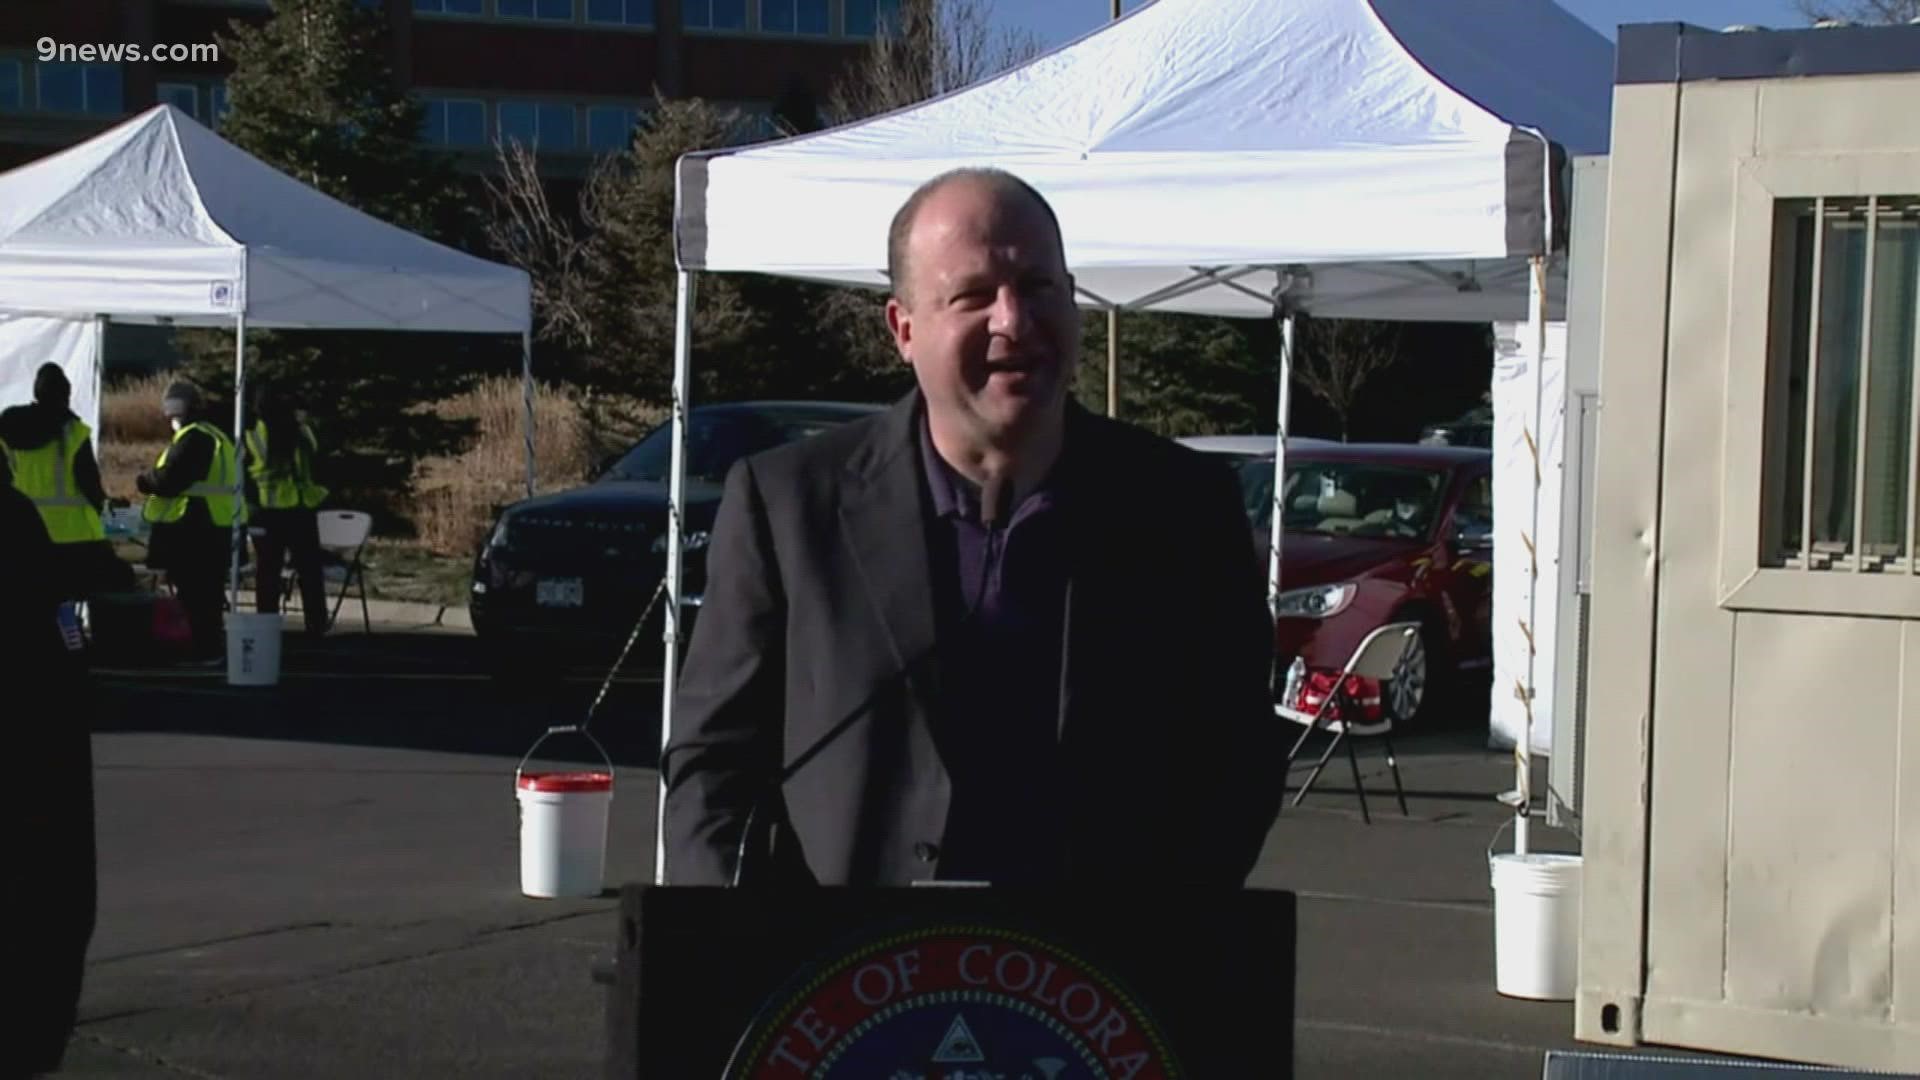 Gov. Jared Polis (D-Colo.) and Mayor Mike Coffman (R-Aurora) spoke Thursday morning from a vaccination site.